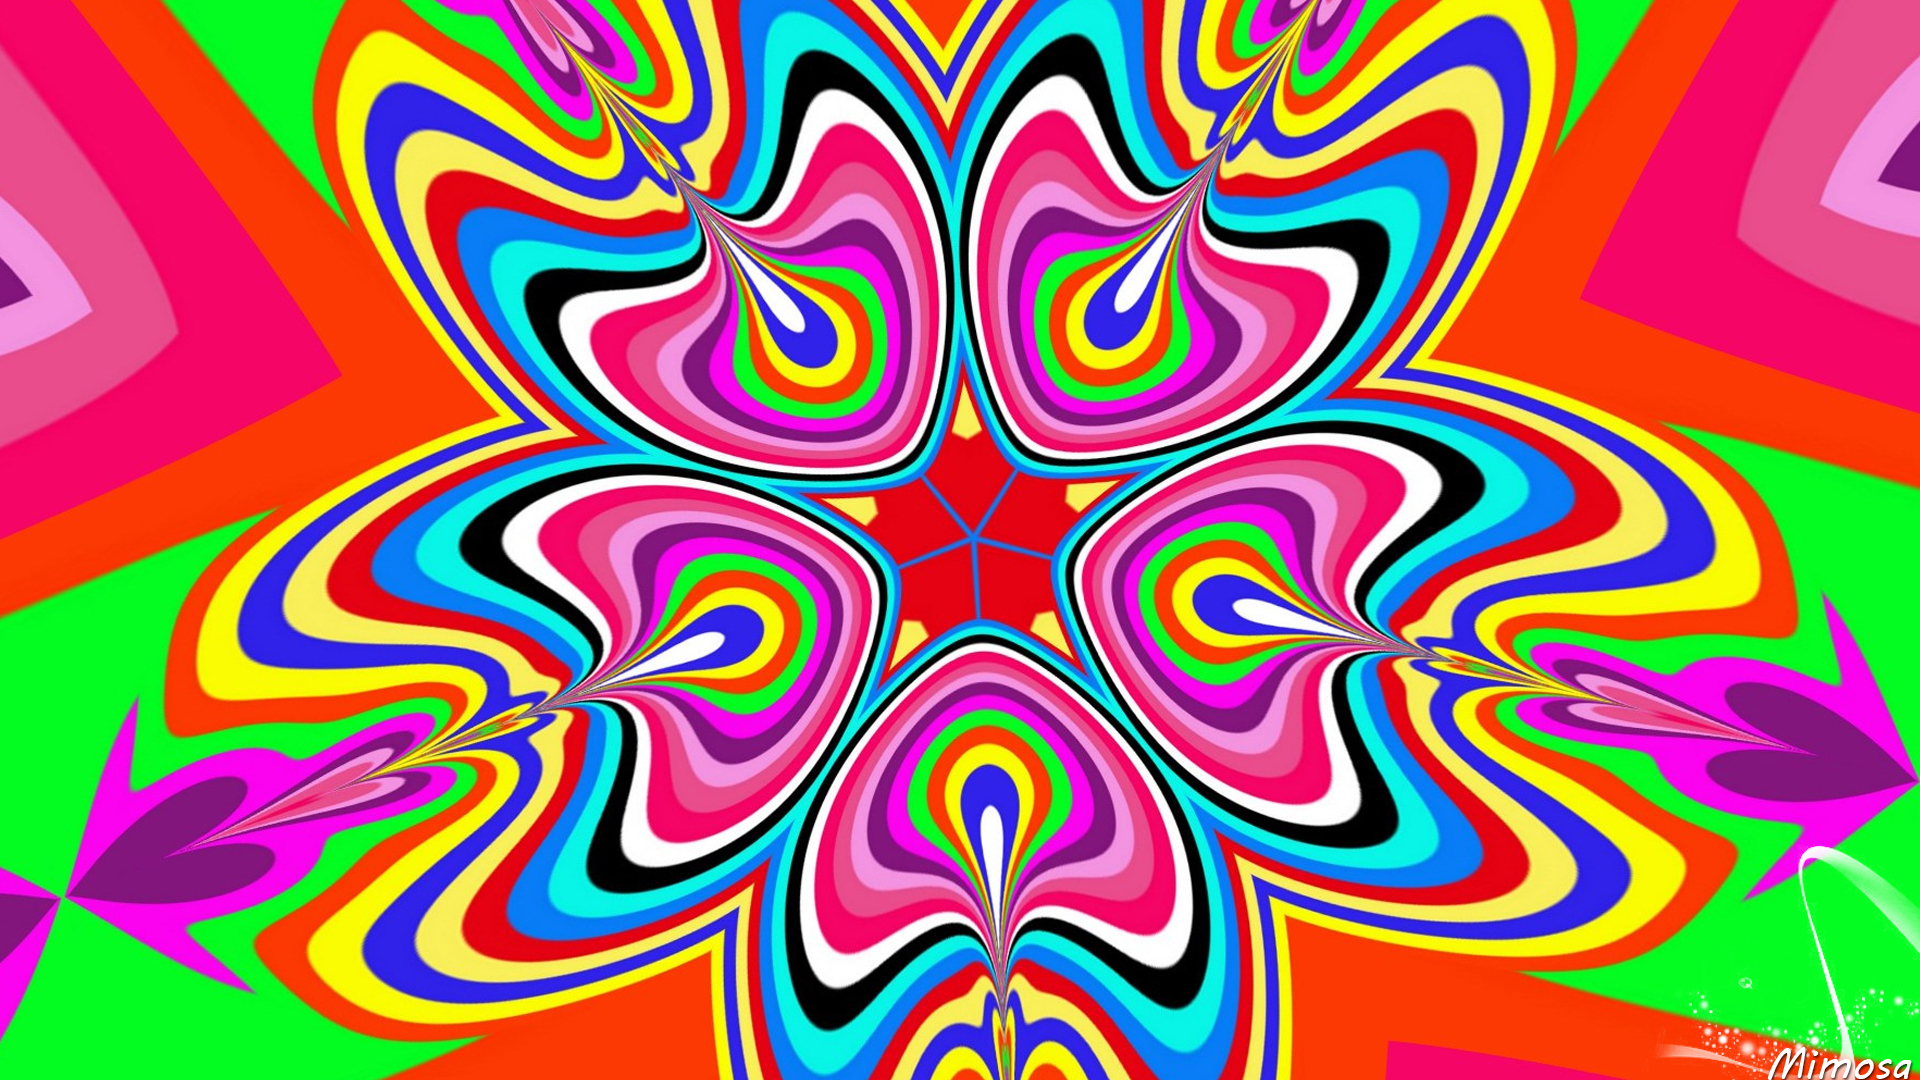 Abstract Artistic Colorful Colors Digital Art Kaleidoscope Shapes 1920x1080